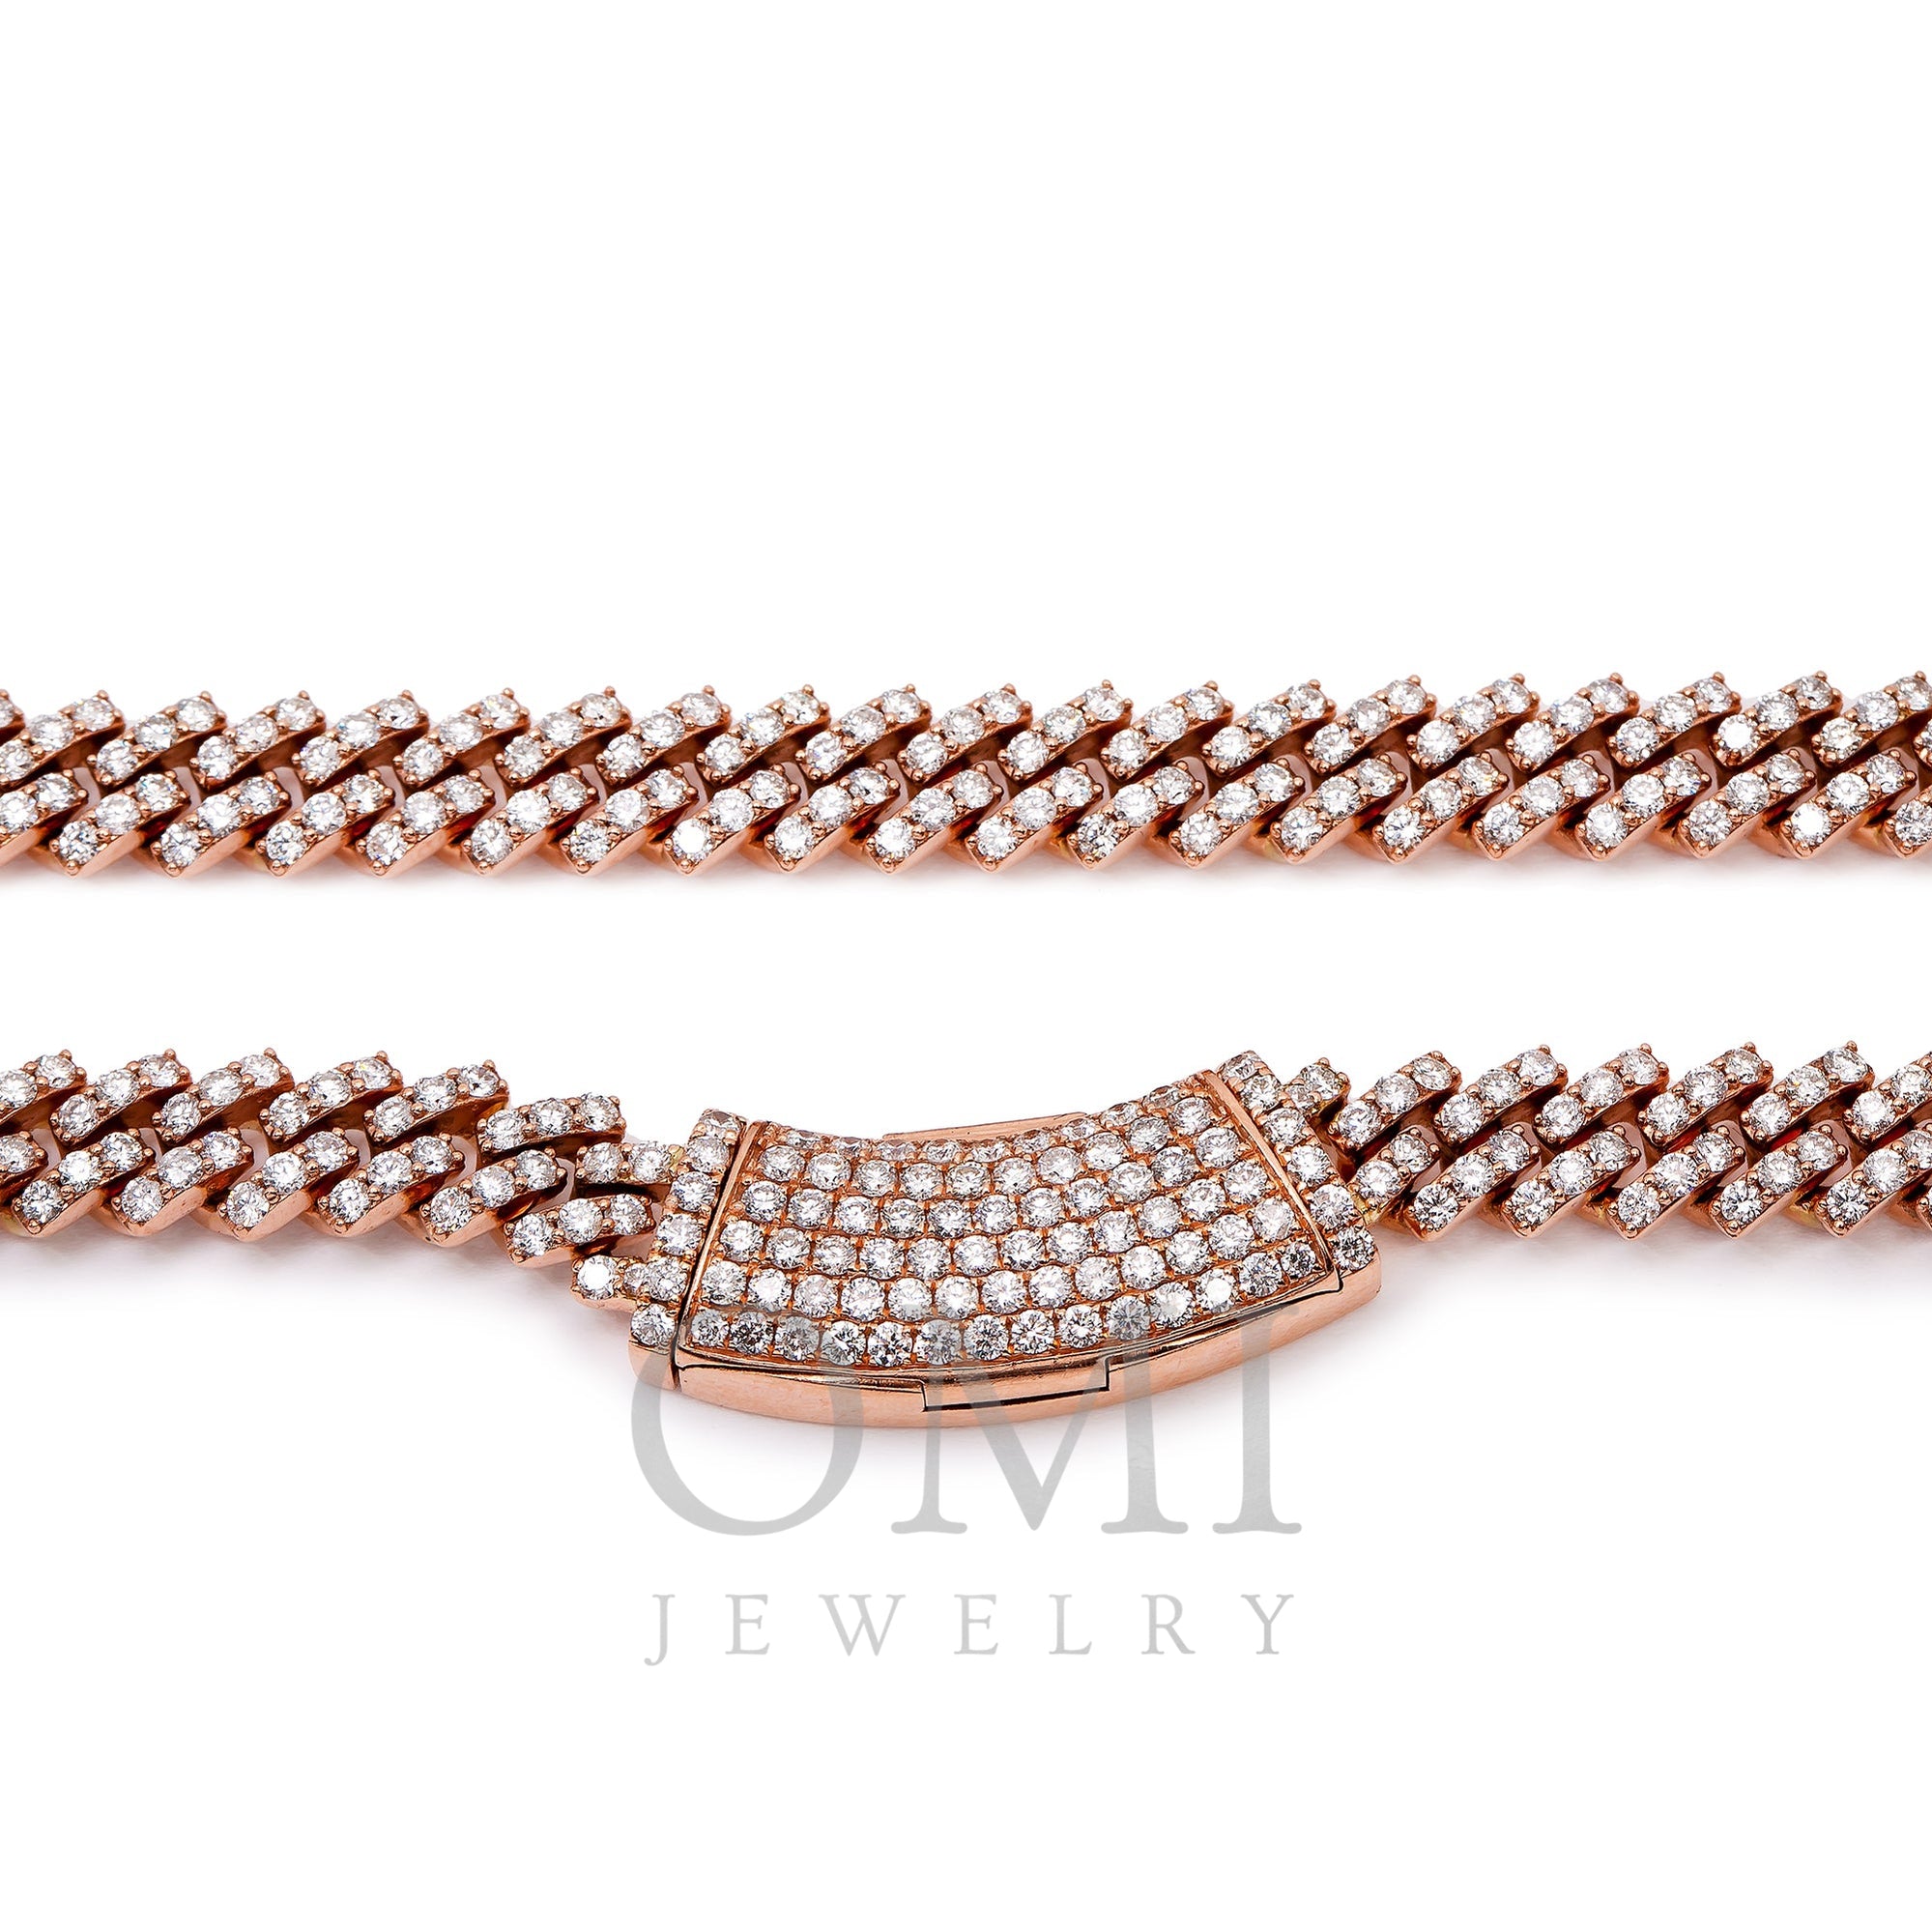 14K ROSE GOLD 24" | 8MM CUBAN CHAIN PRONG SET WITH 21.25 CT DIAMONDS